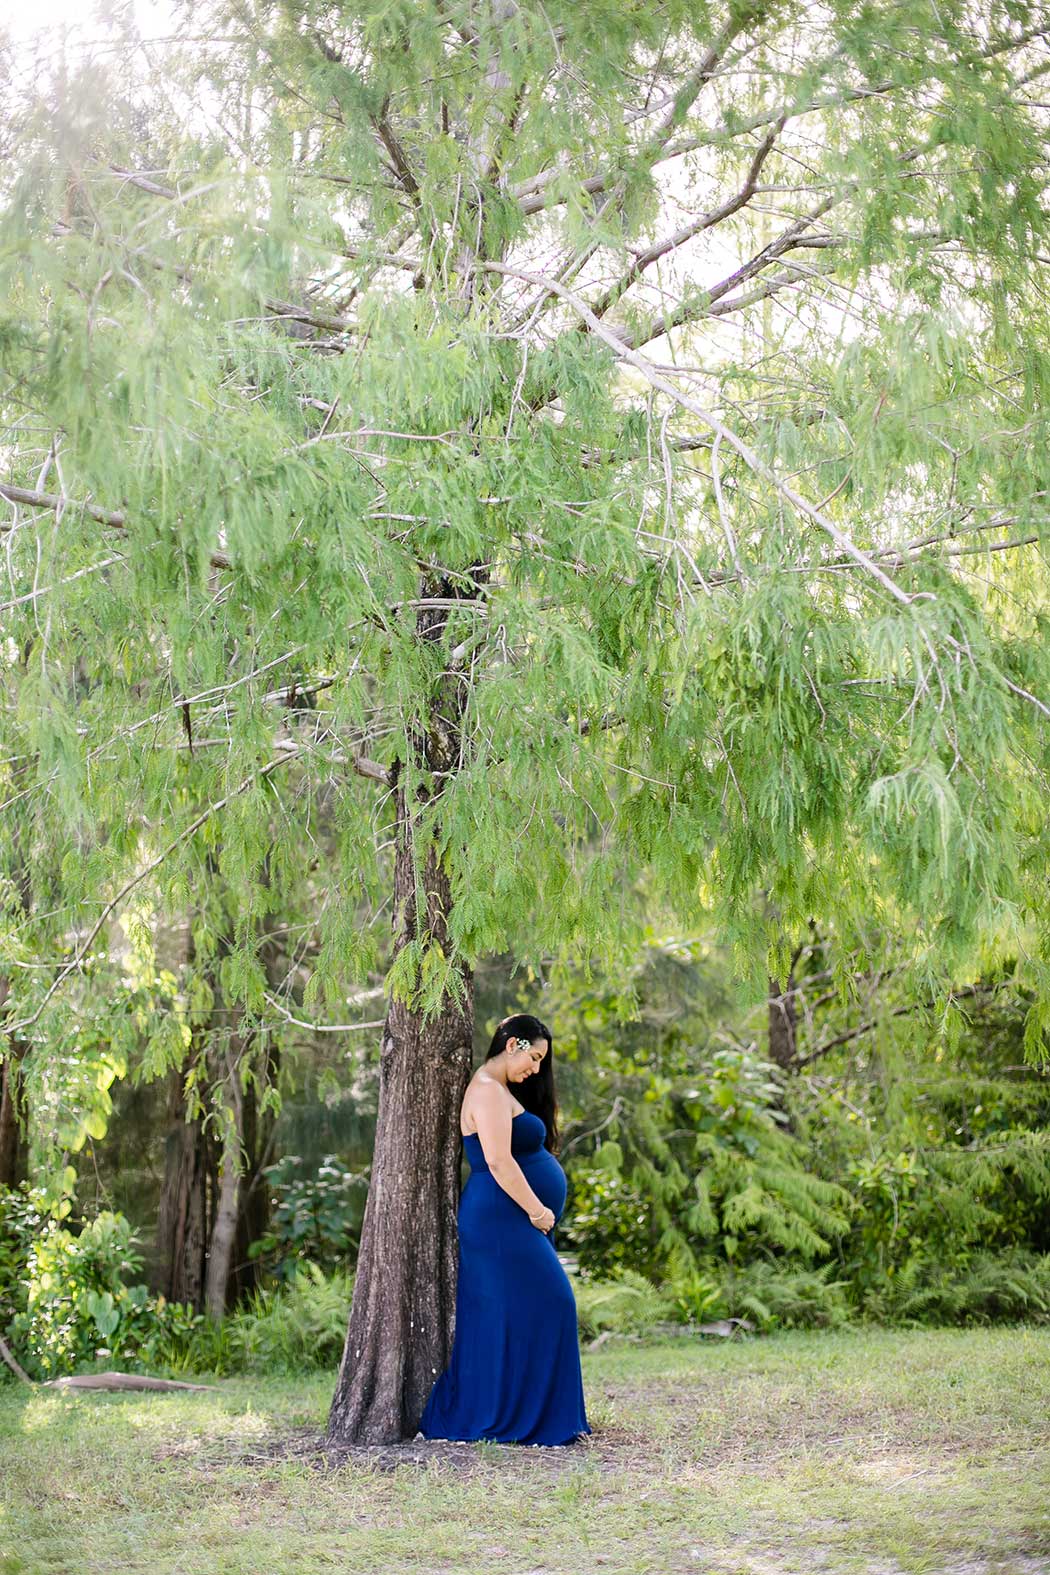 girl in navy maternity dress poses next to tree | maternity photography unique | unique maternity photography session | tree tops park maternity photoshoot | fort lauderdale maternity photographer